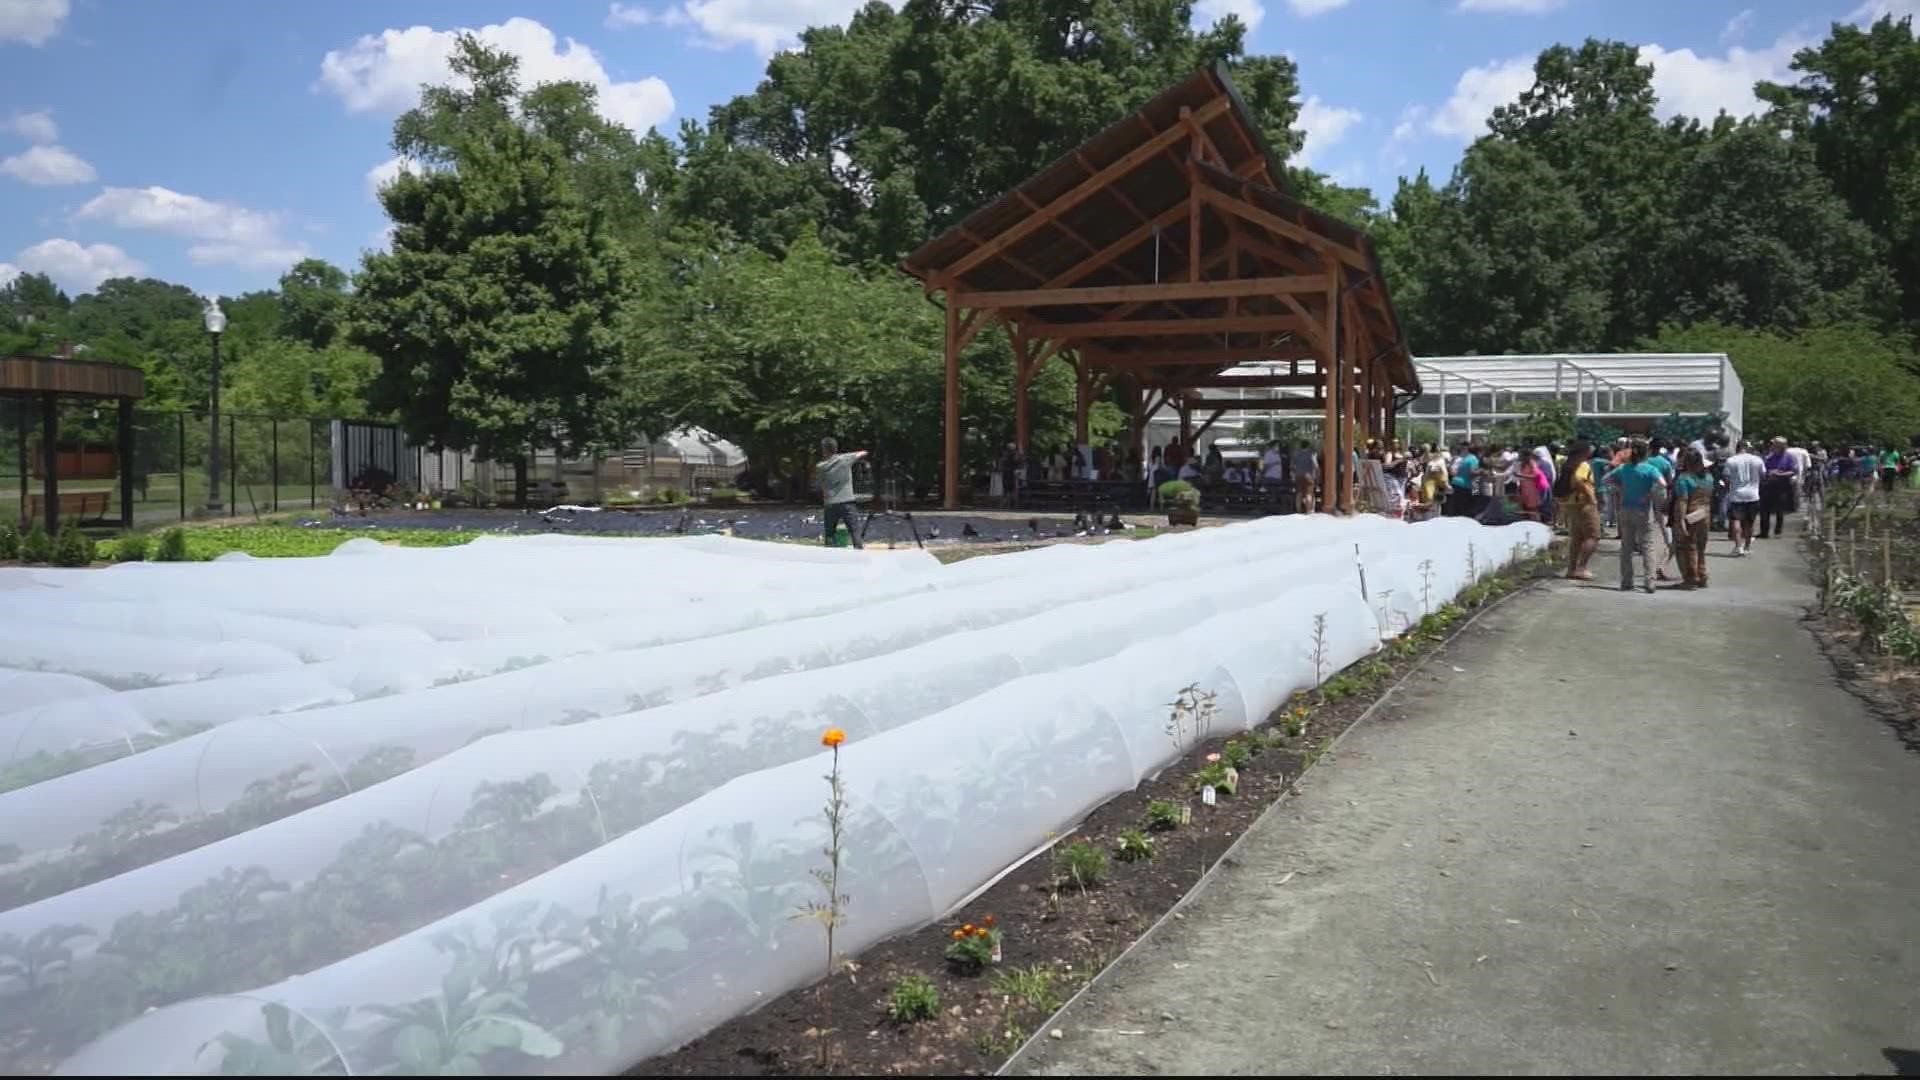 A new community farm and wellness space is now open in the Congress Heights neighborhood of Ward 8 in the District.